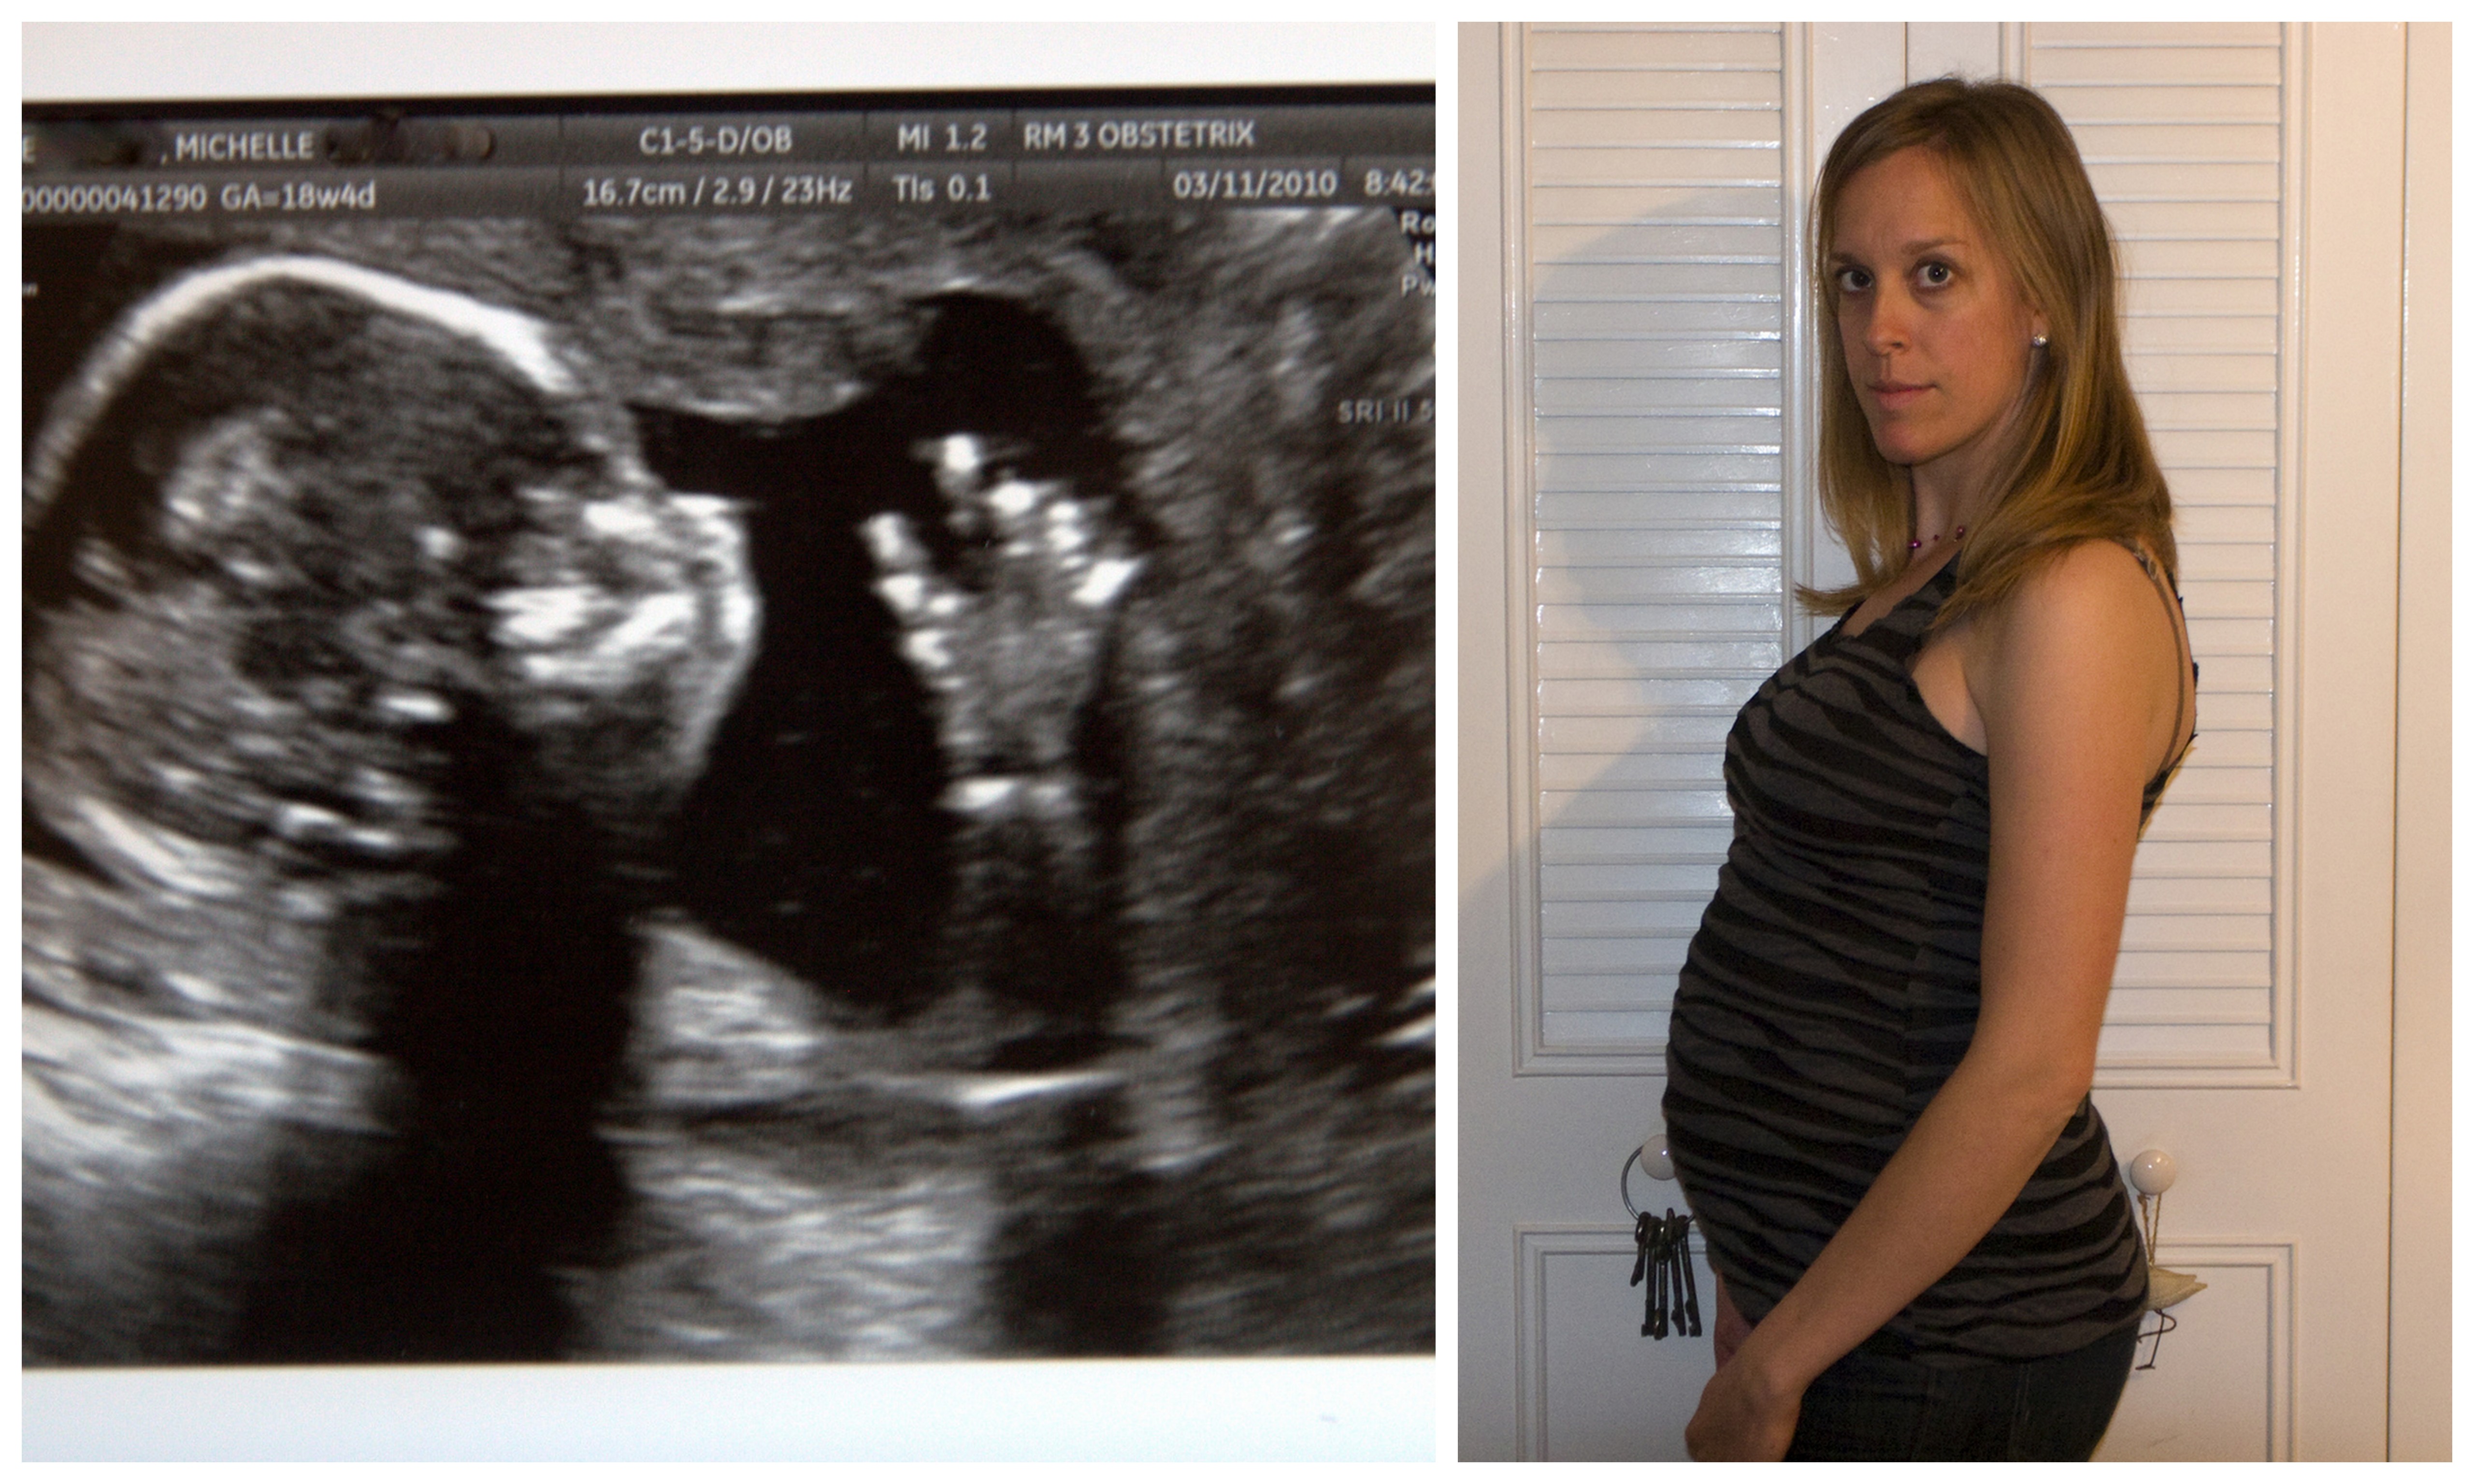 3/11 ultrasound, and 4/10 first profile after finding out the news